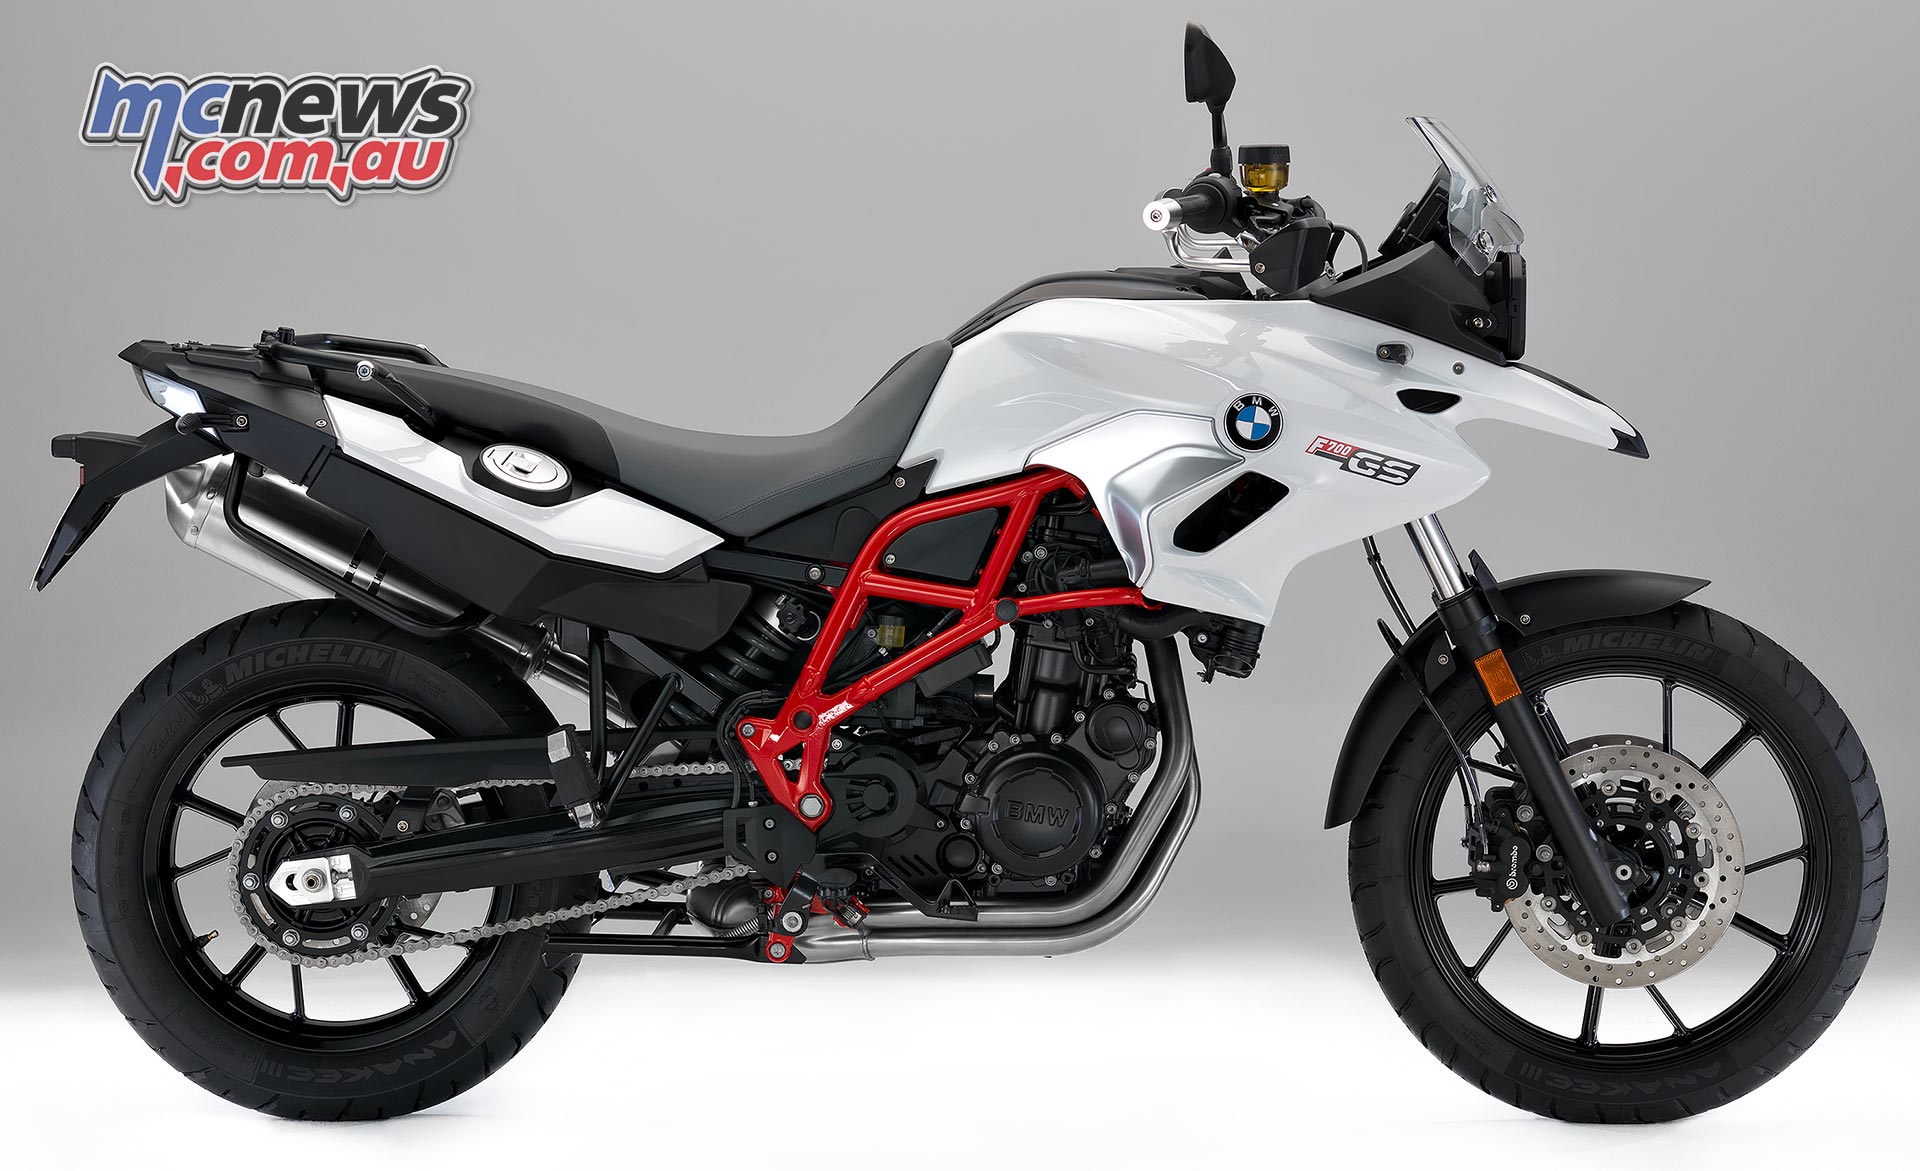 2017 Bmw F 800 Gs And F 700 Gs Revealed | Mcnews